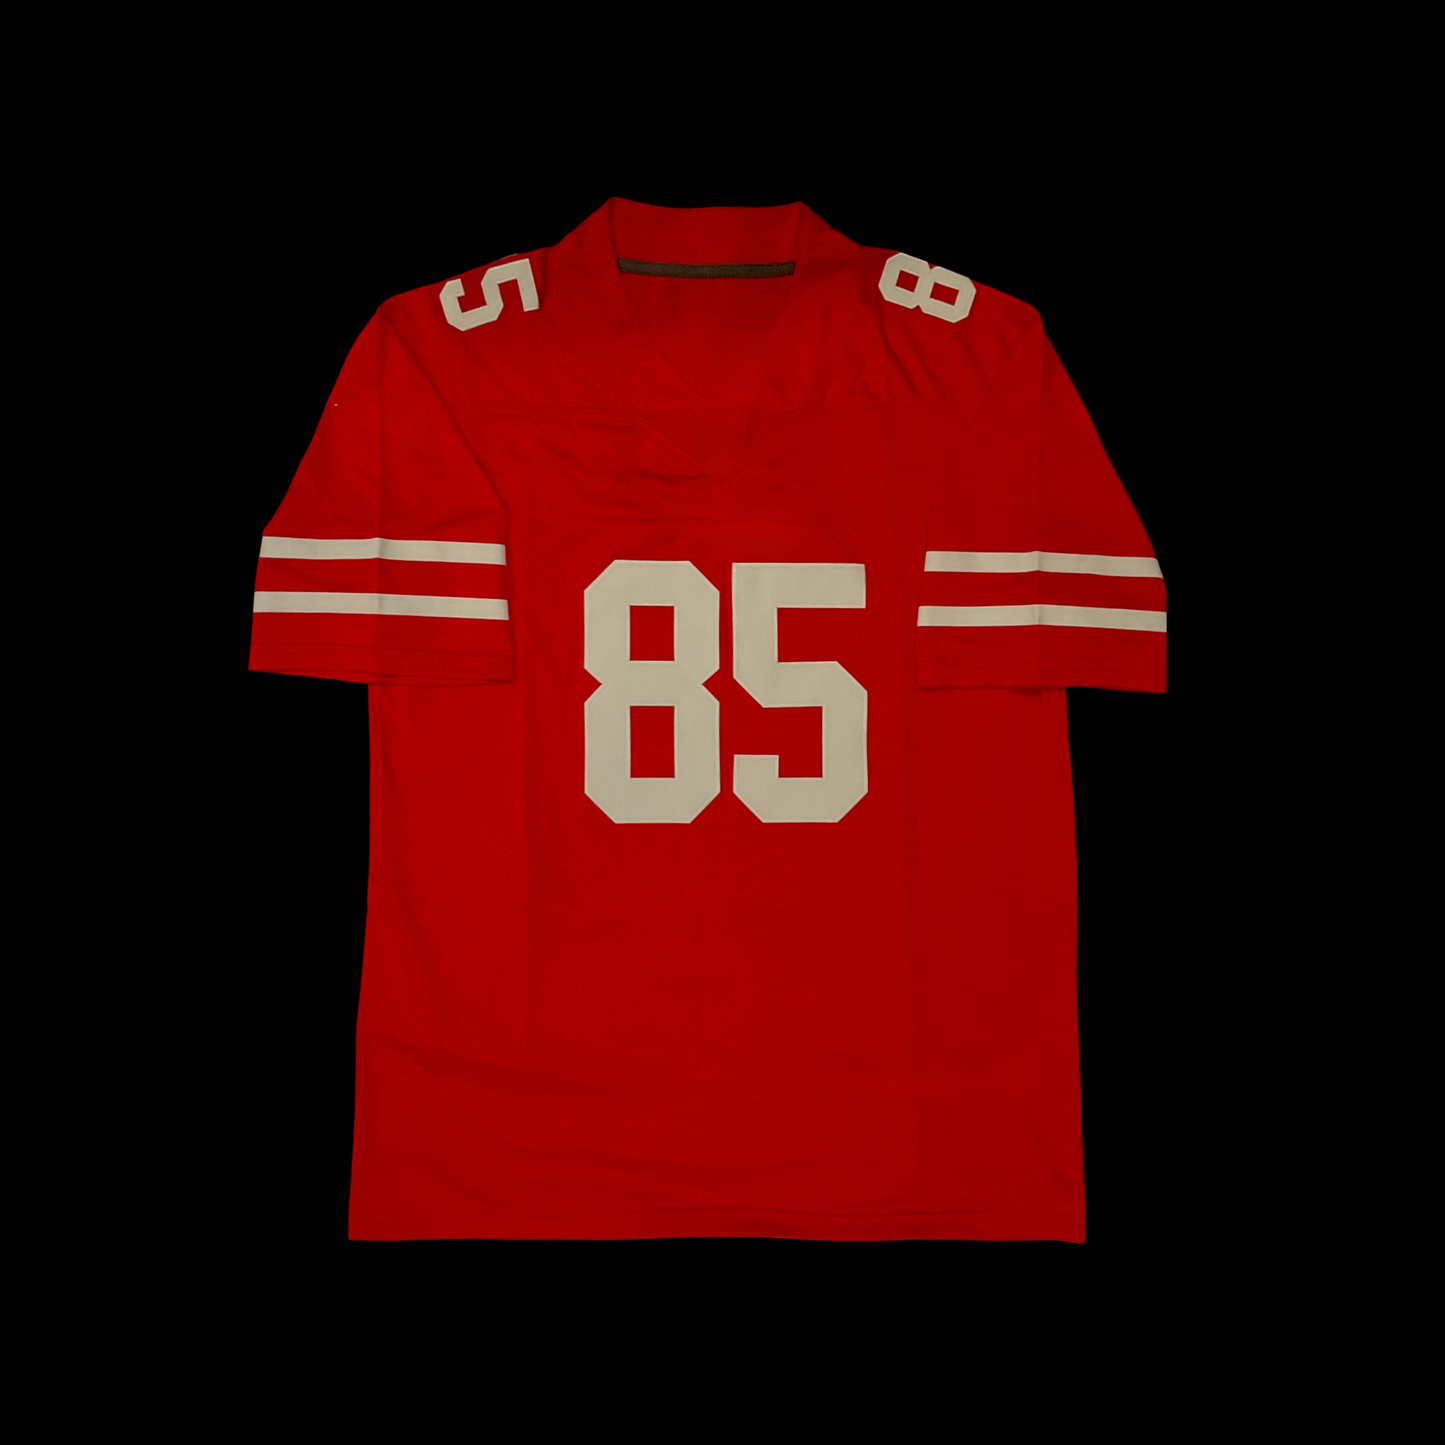 #85 Kittle Stitched Men’s 49ers jersey